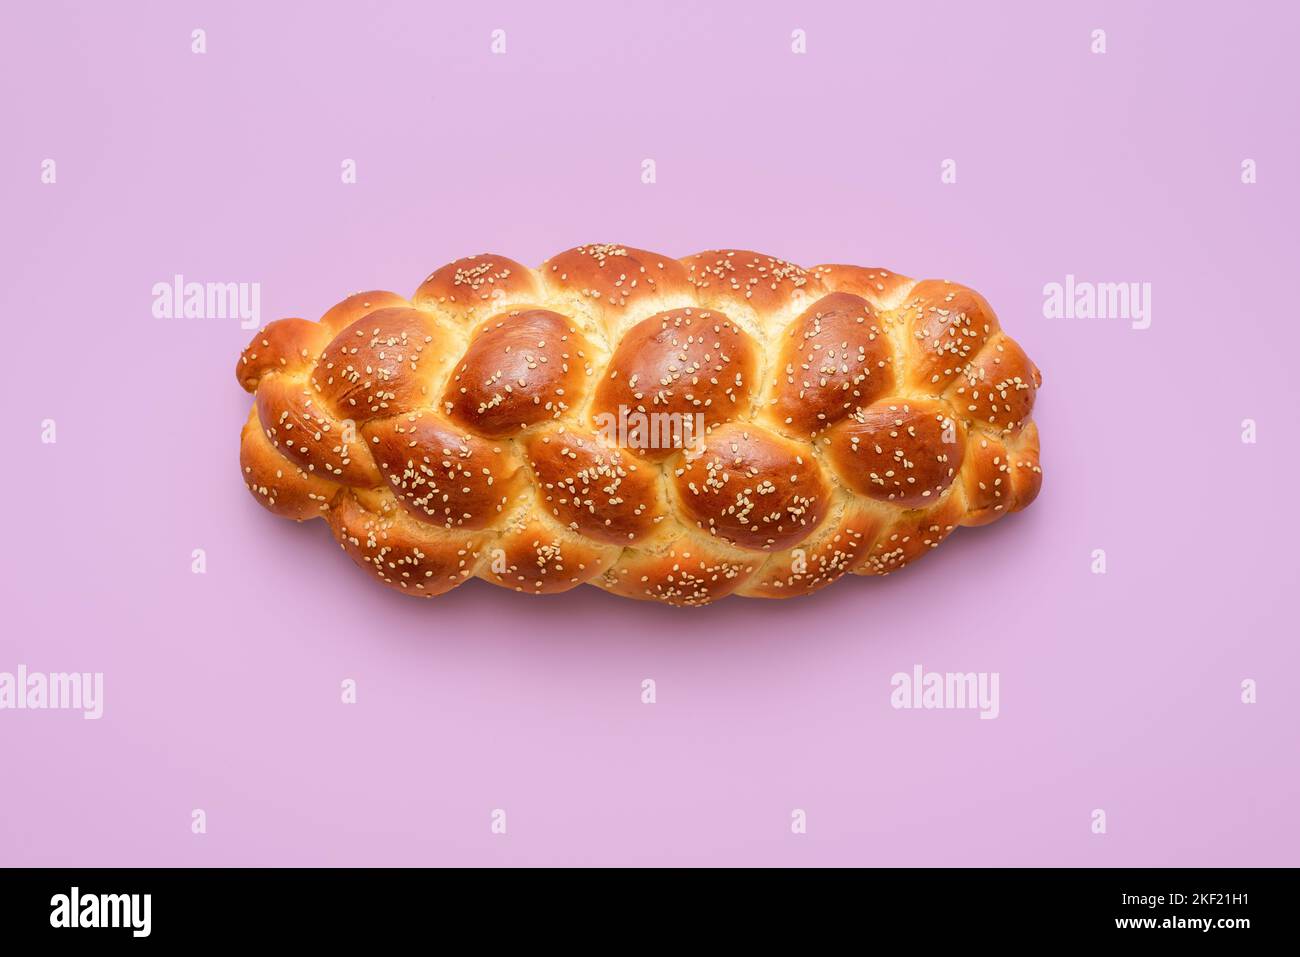 Directly above view with a homemade challah bread minimalist on a purple table. Braided bread, a traditional Jewish recipe, on a vibrant-colored backg Stock Photo